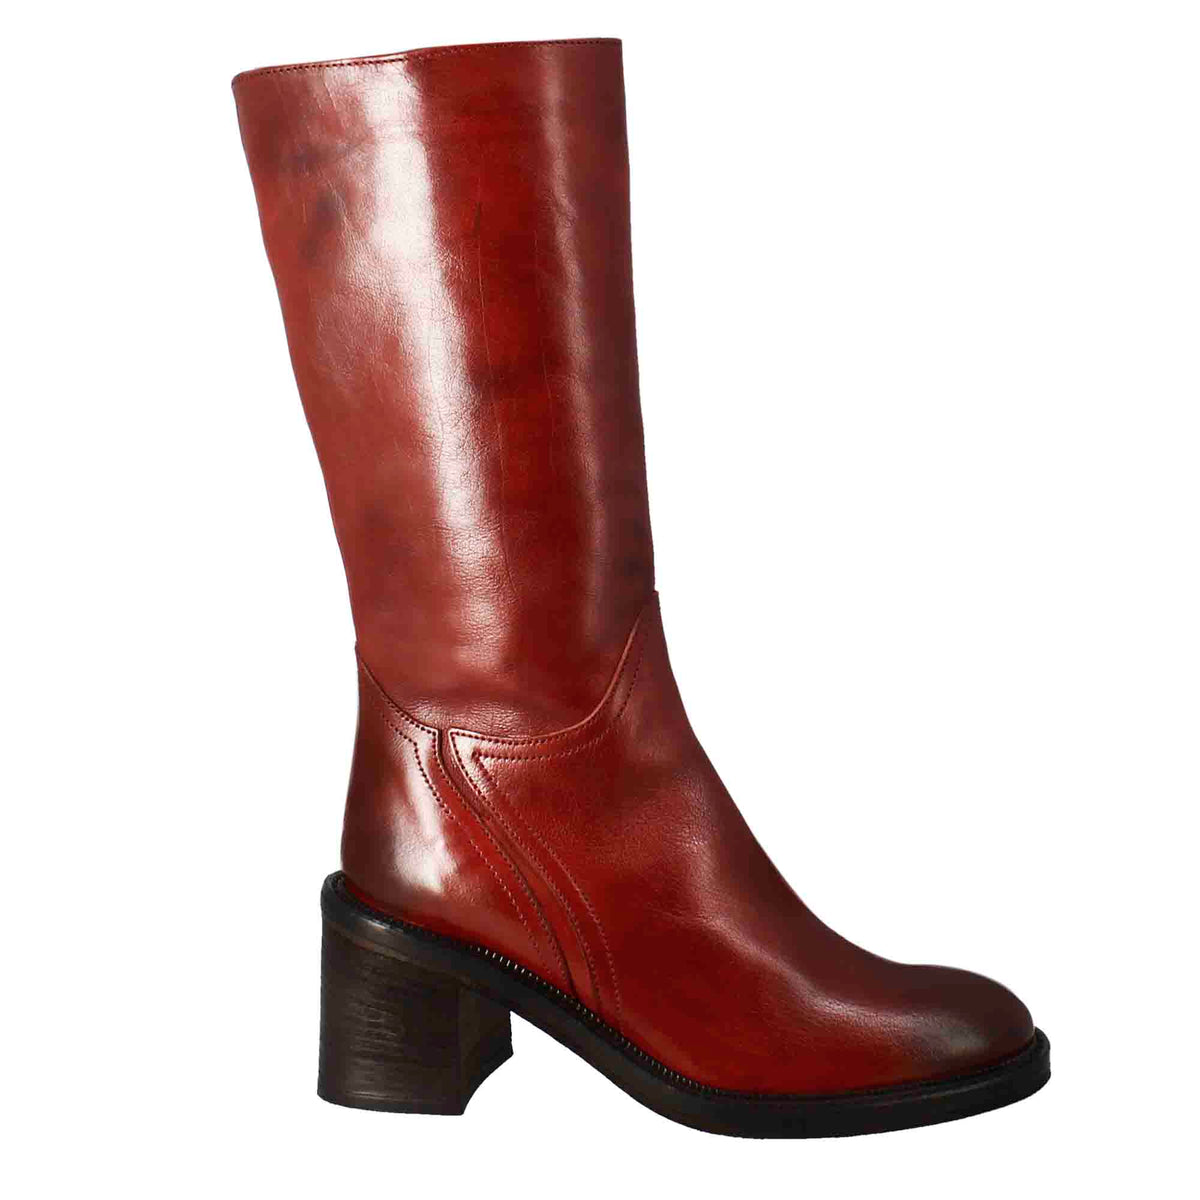 Women's calf-high diver boot with heel in red washed leather